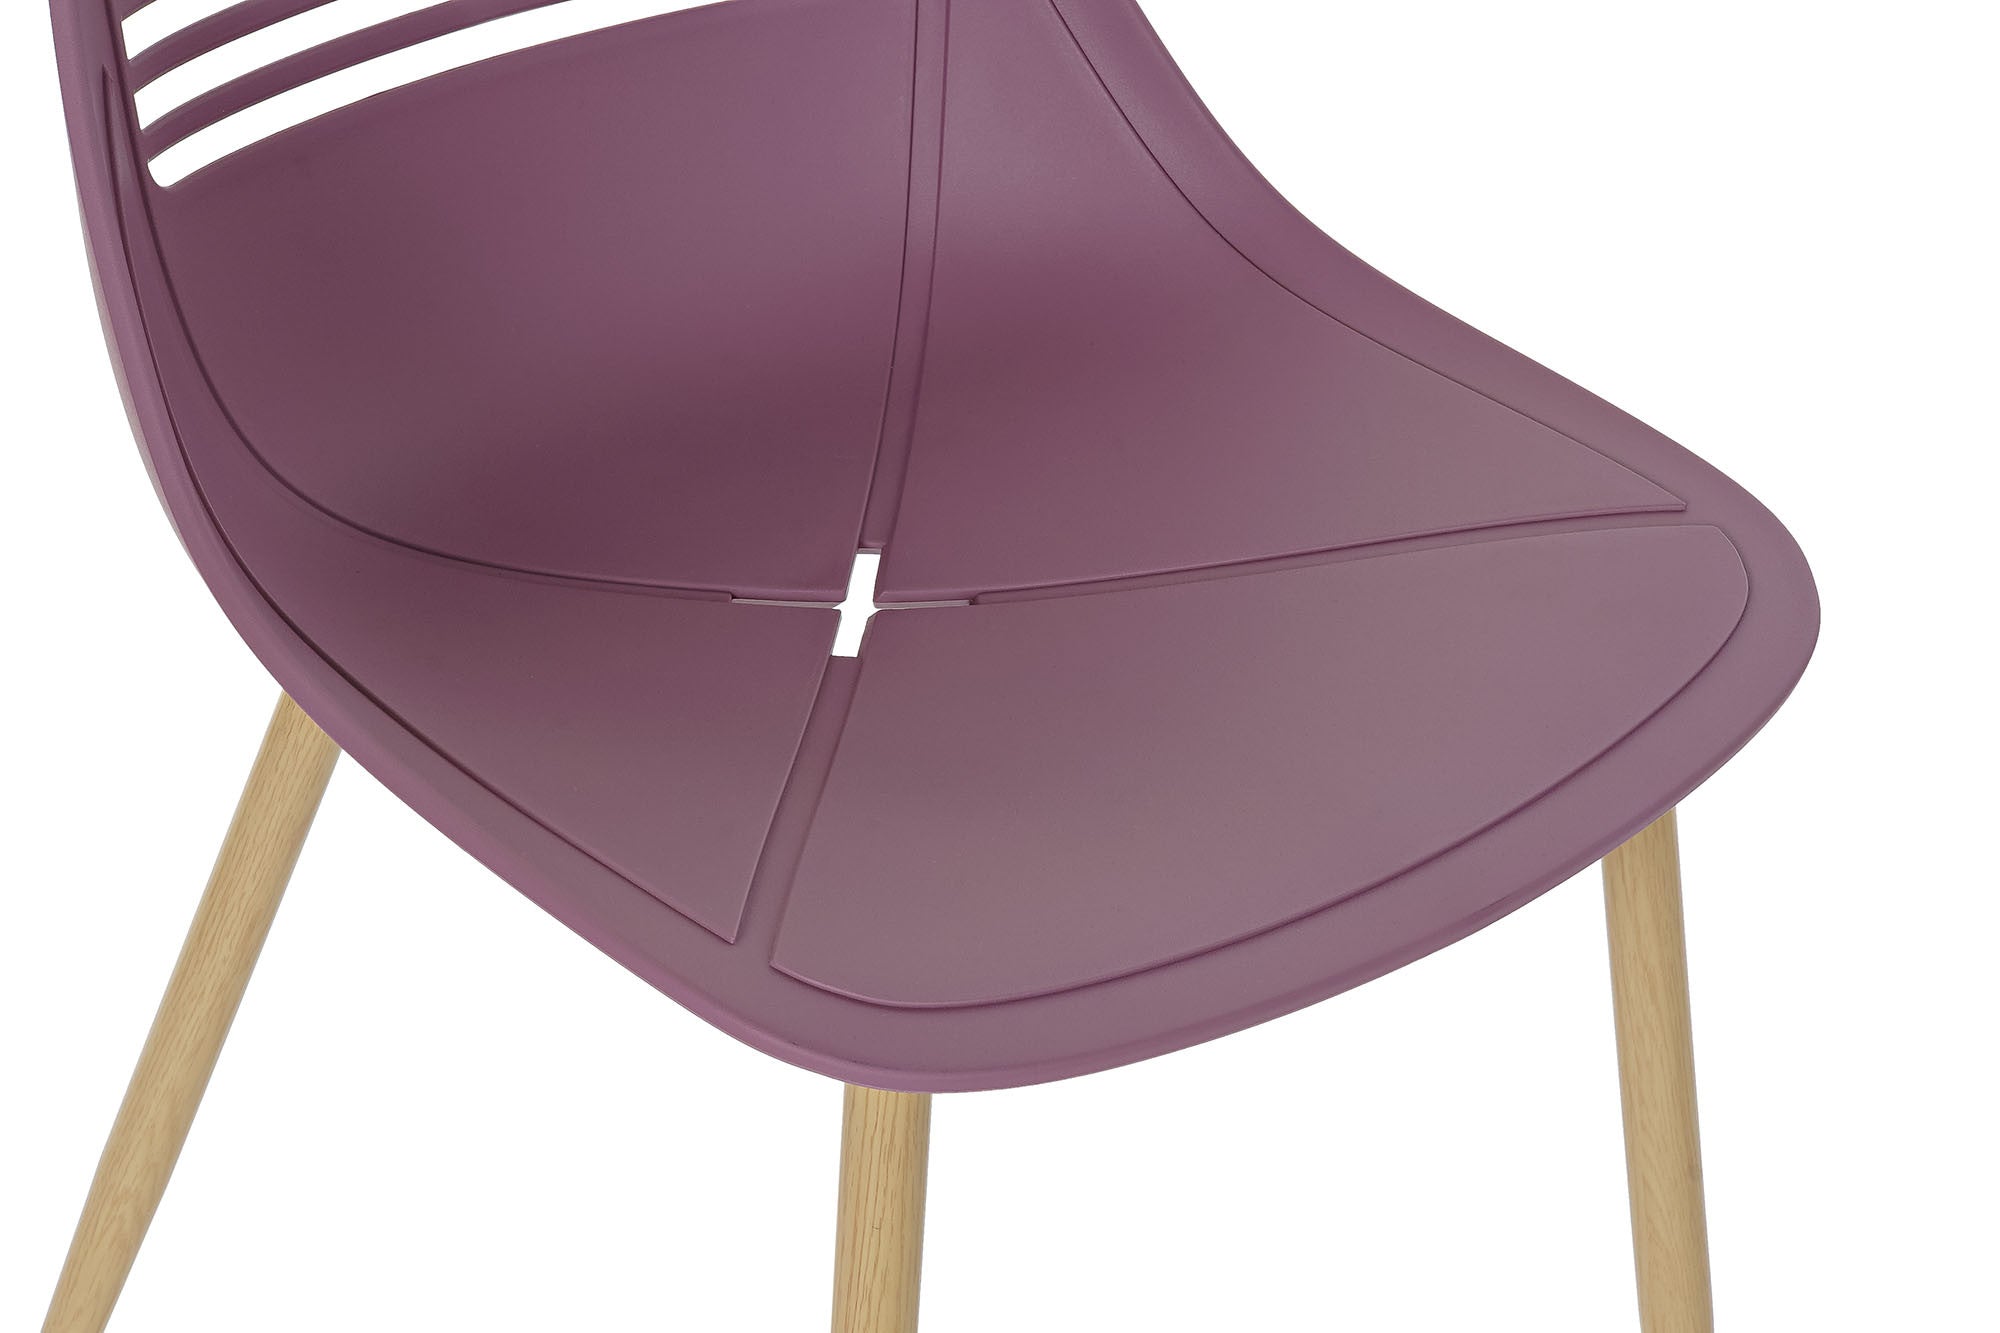 Scandinavian Design Chair Matte Pink and Light Brown - Elegance and Comfort for Adults 